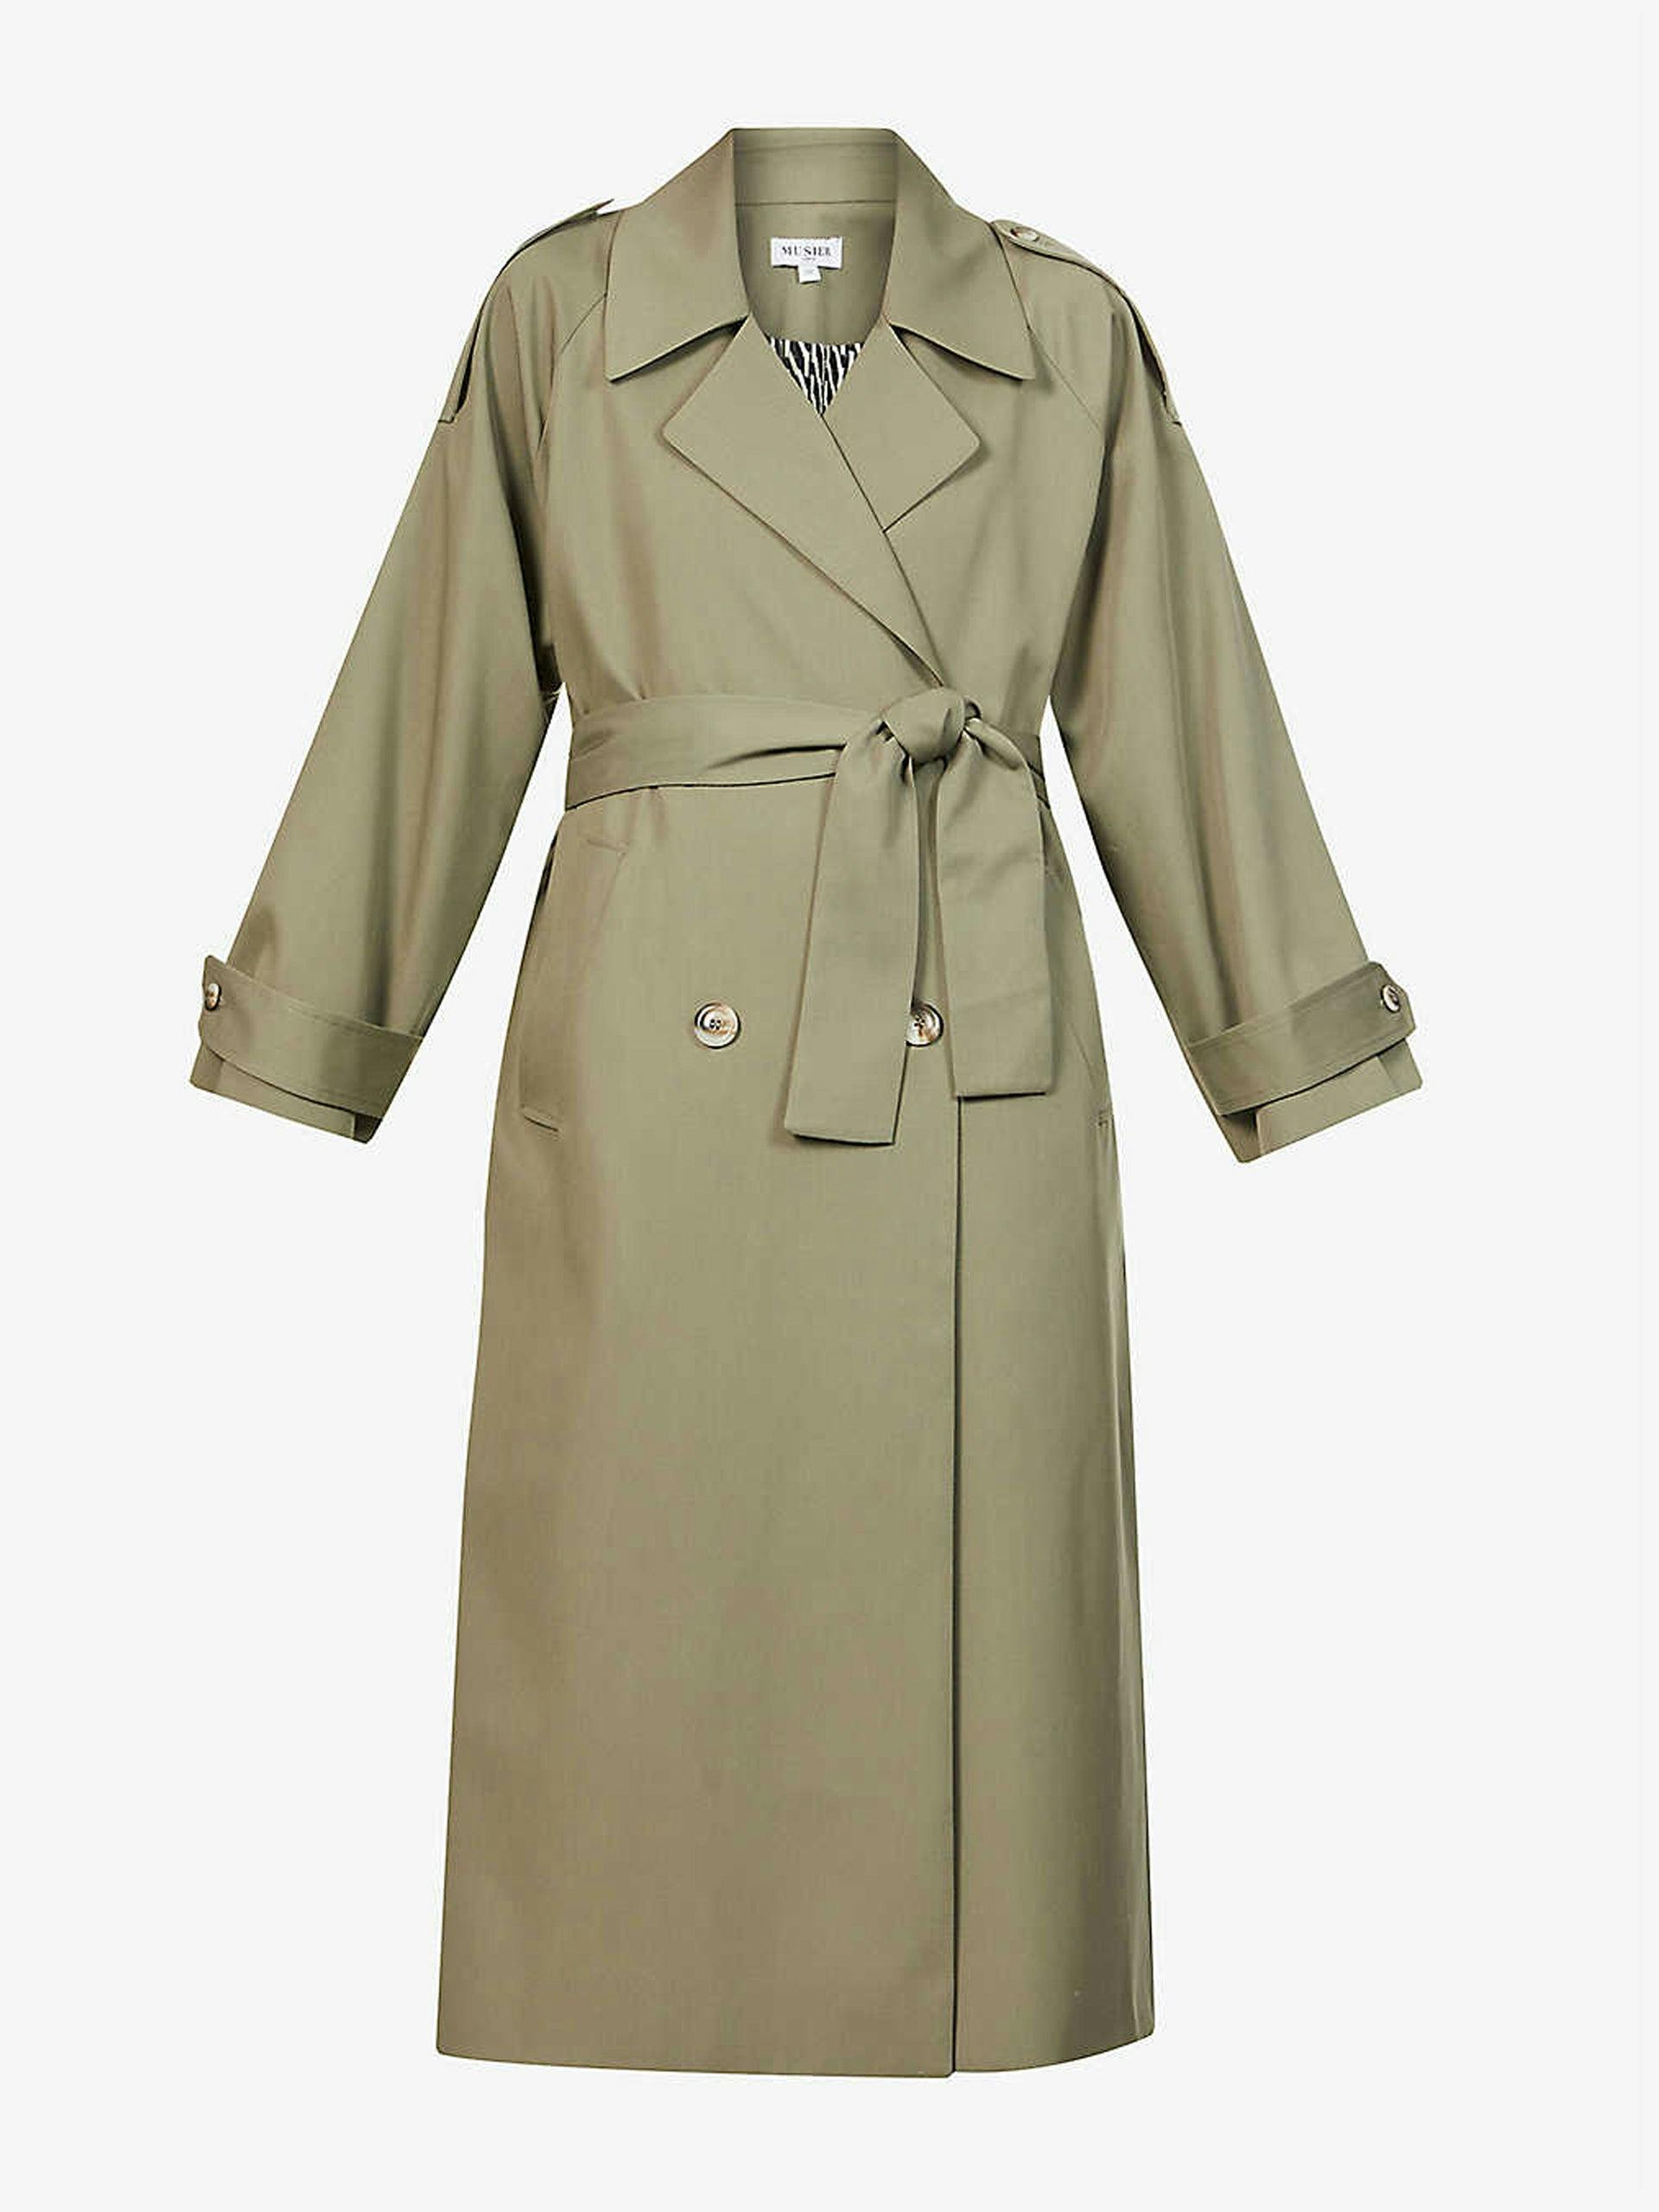 Dorothee single-breasted woven trench coat